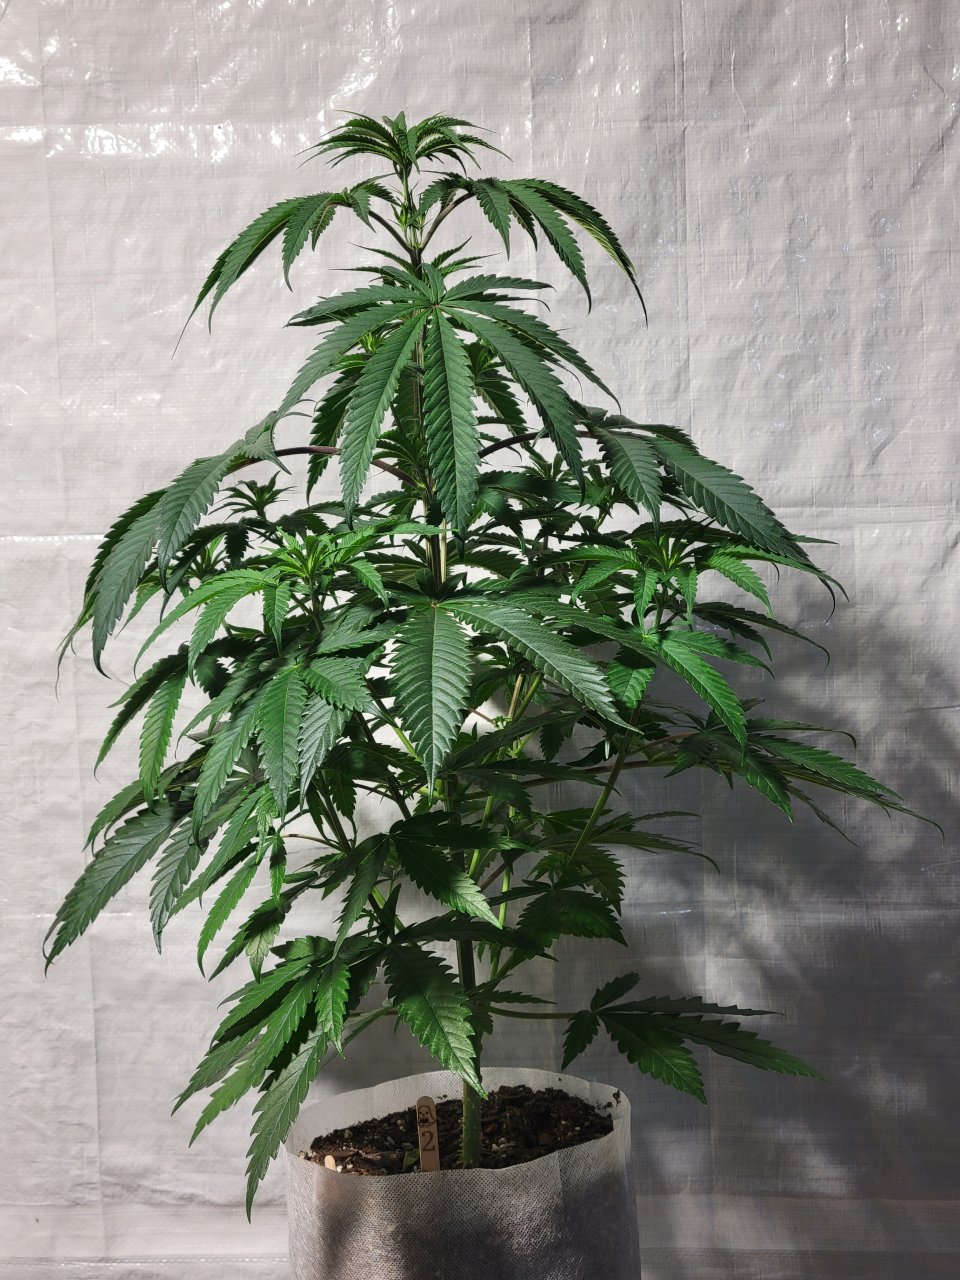 Purple Ghost Candy #2 front day 59